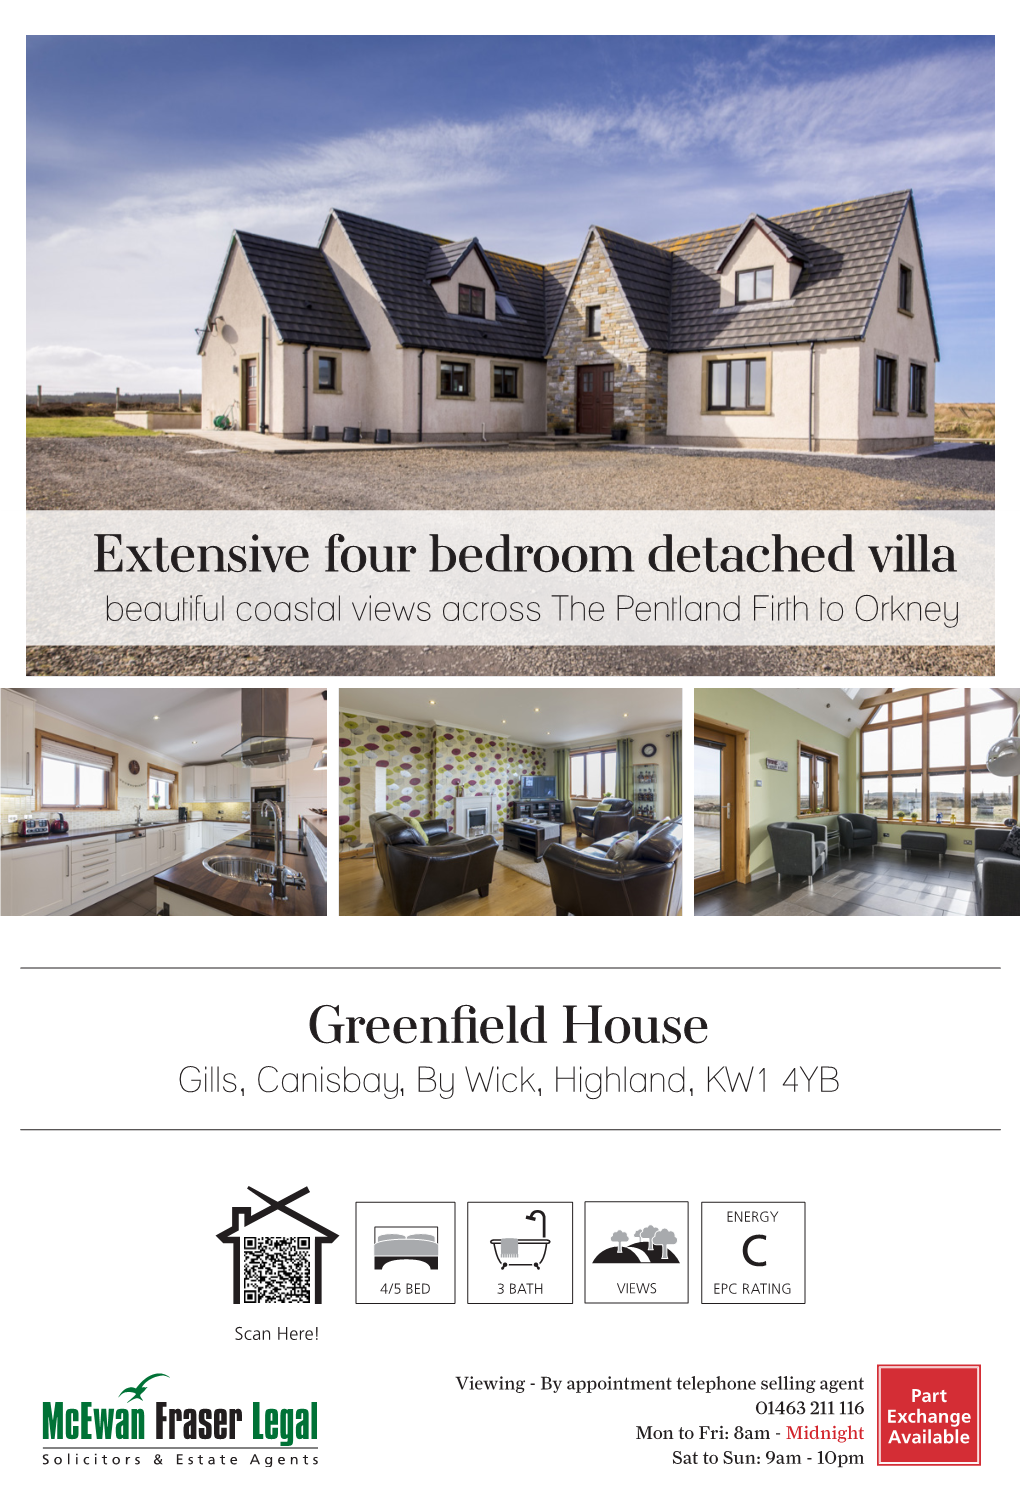 Greenfield House Extensive Four Bedroom Detached Villa